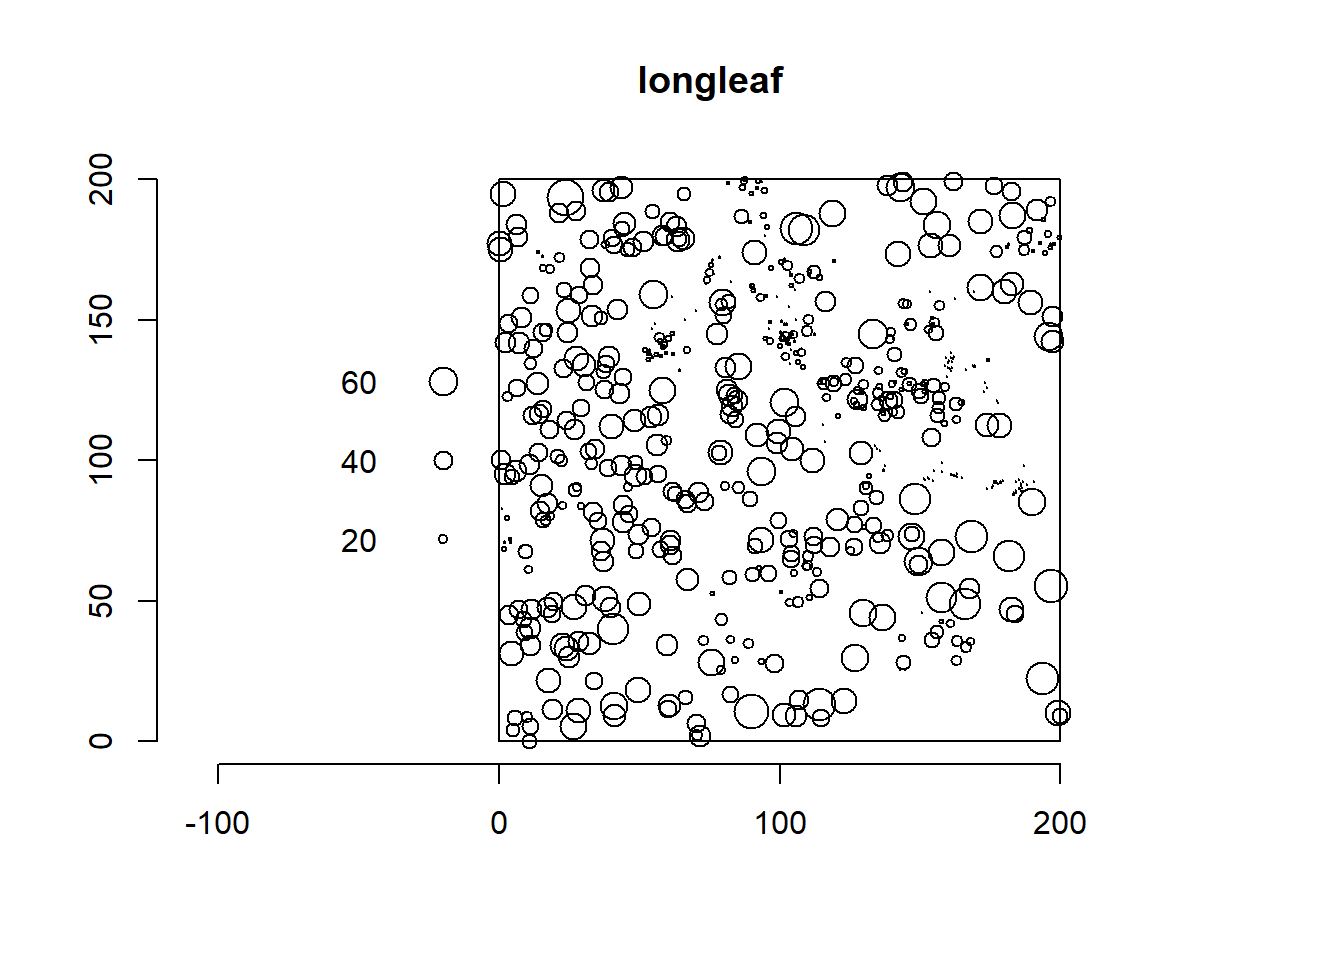 Locations and diameters of 584 trees in a forest of longleaf pine trees in Georgia, USA.